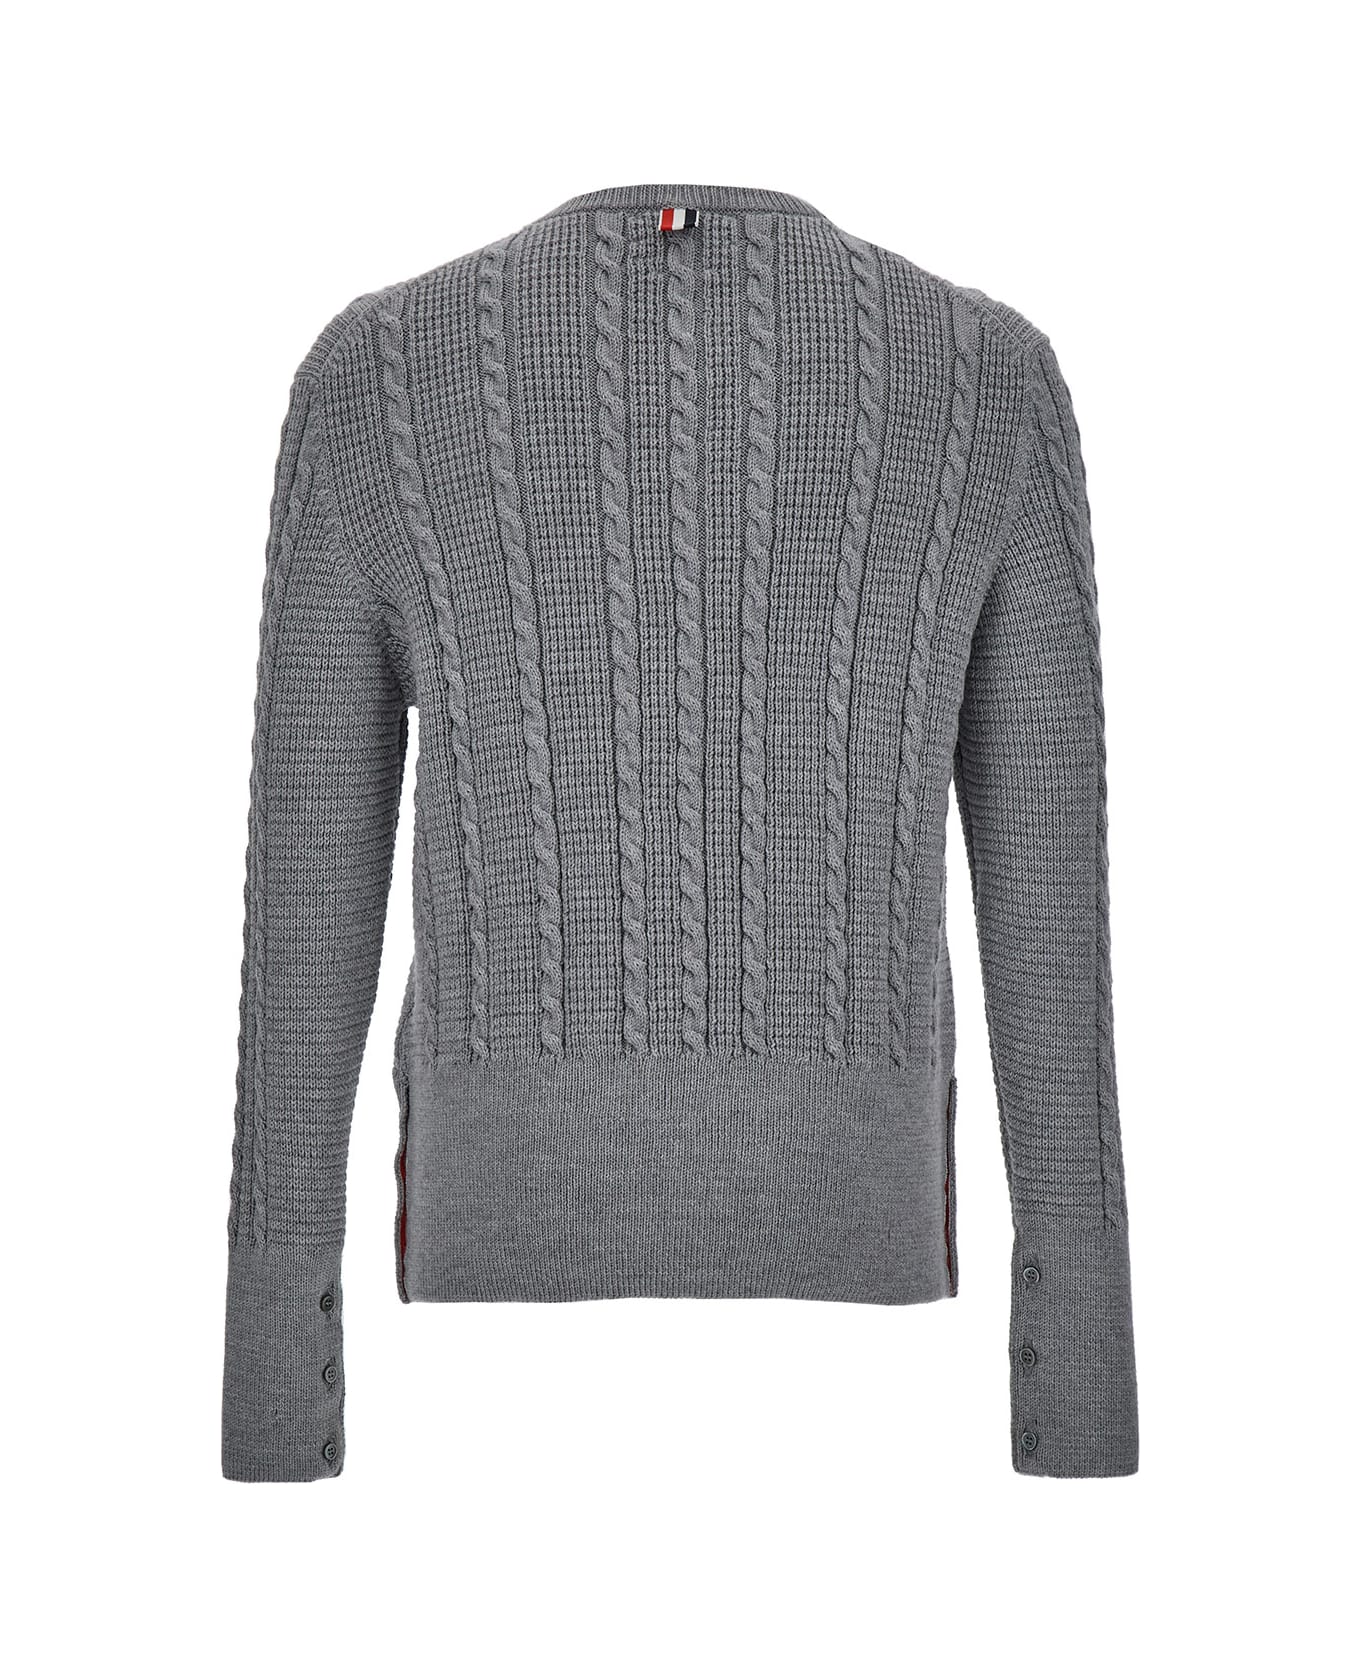 Thom Browne 'cable' Sweater - Lt Grey